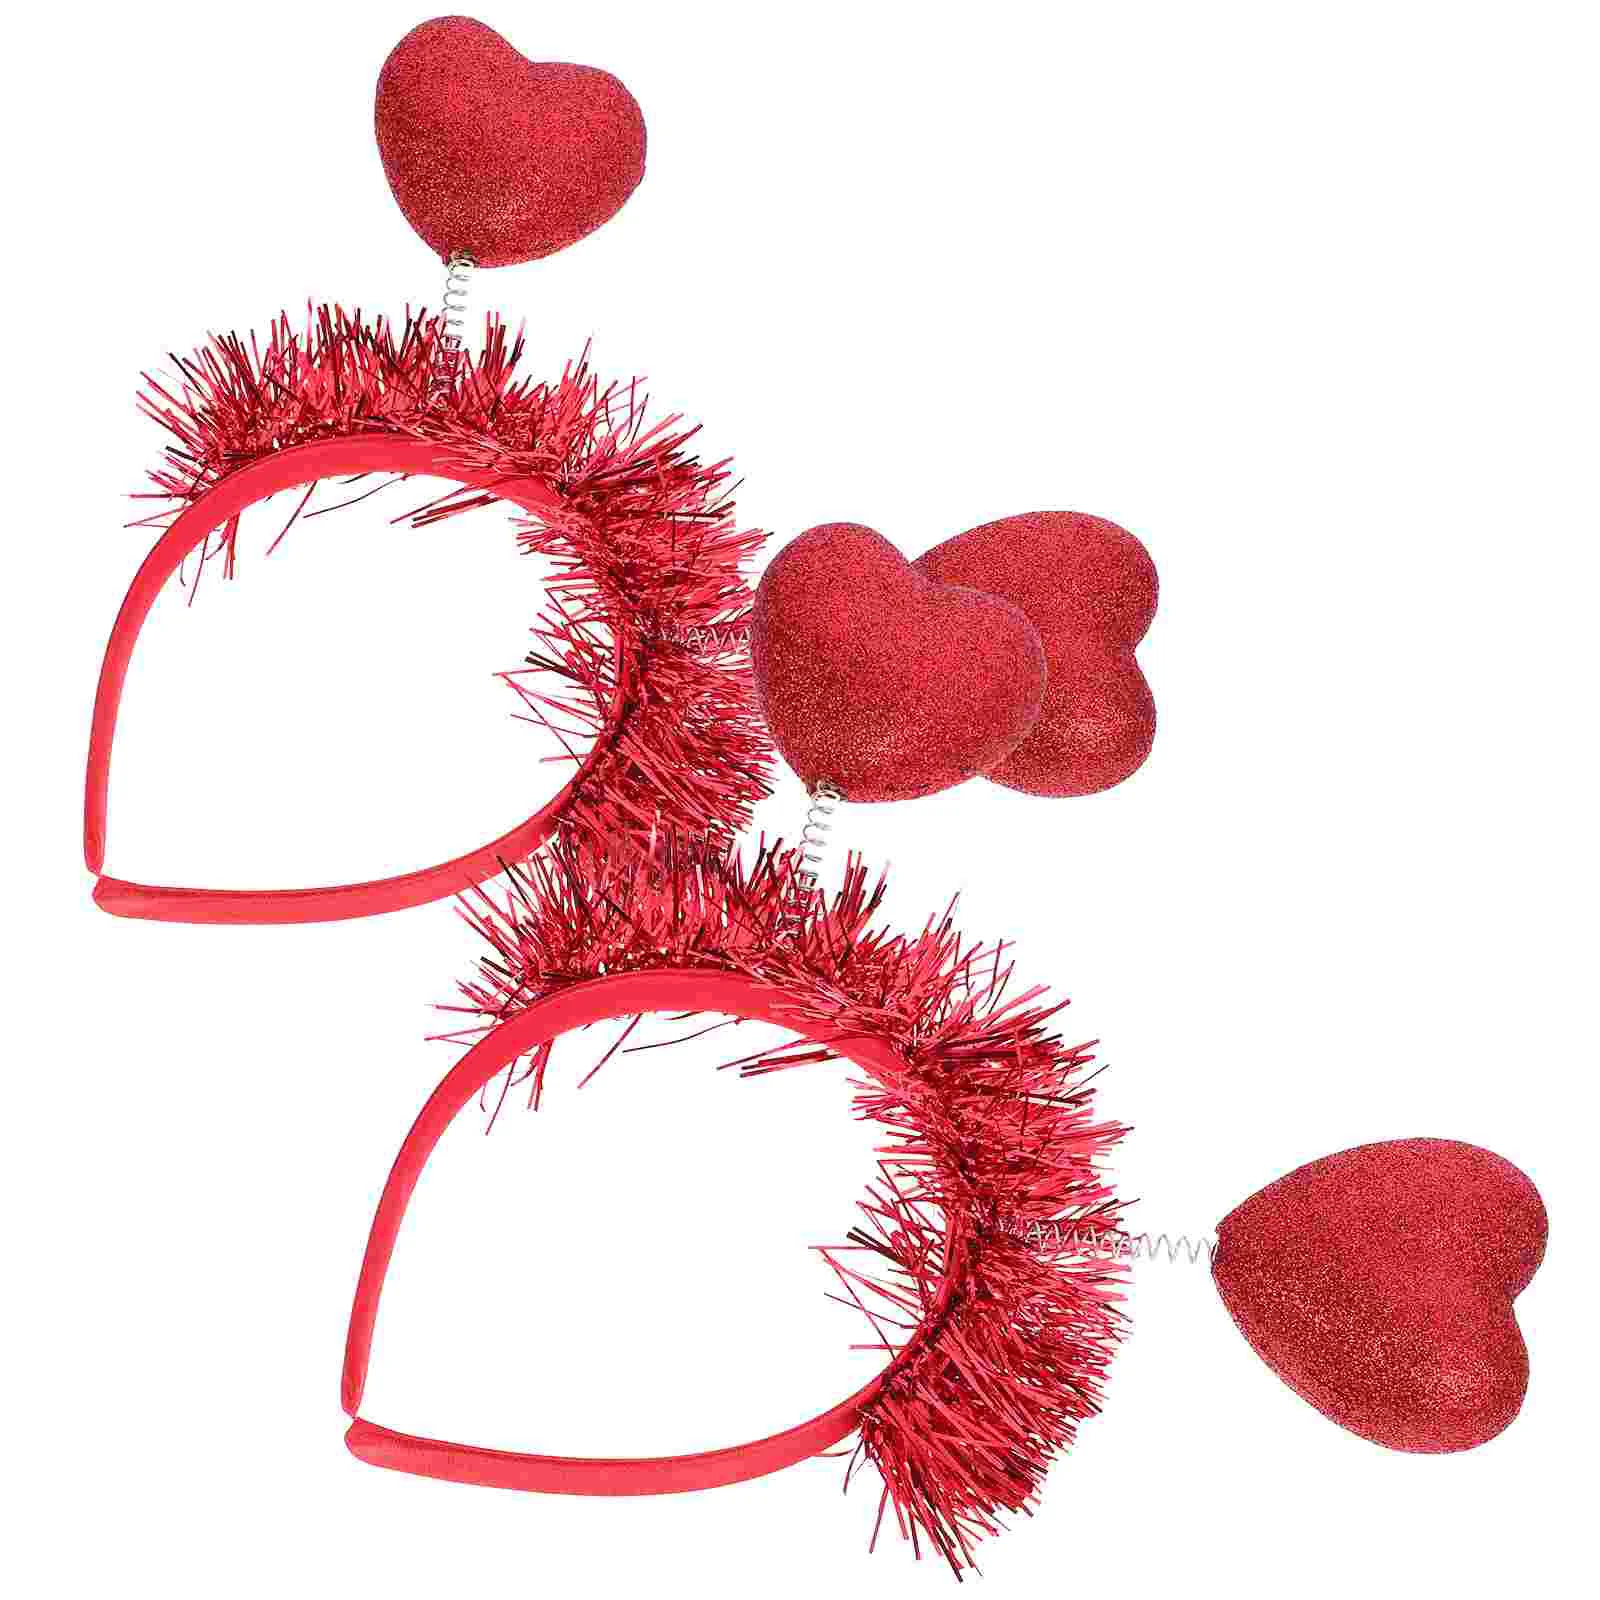 2 Pcs Love Headband Props Valentines Day Party Hairband Wedding Decorations Photography Headpiece Heart-shaped dvotinst baby photography props wool handmade summer watermelon hat spirit bonnet melon decorations studio shooting photo props